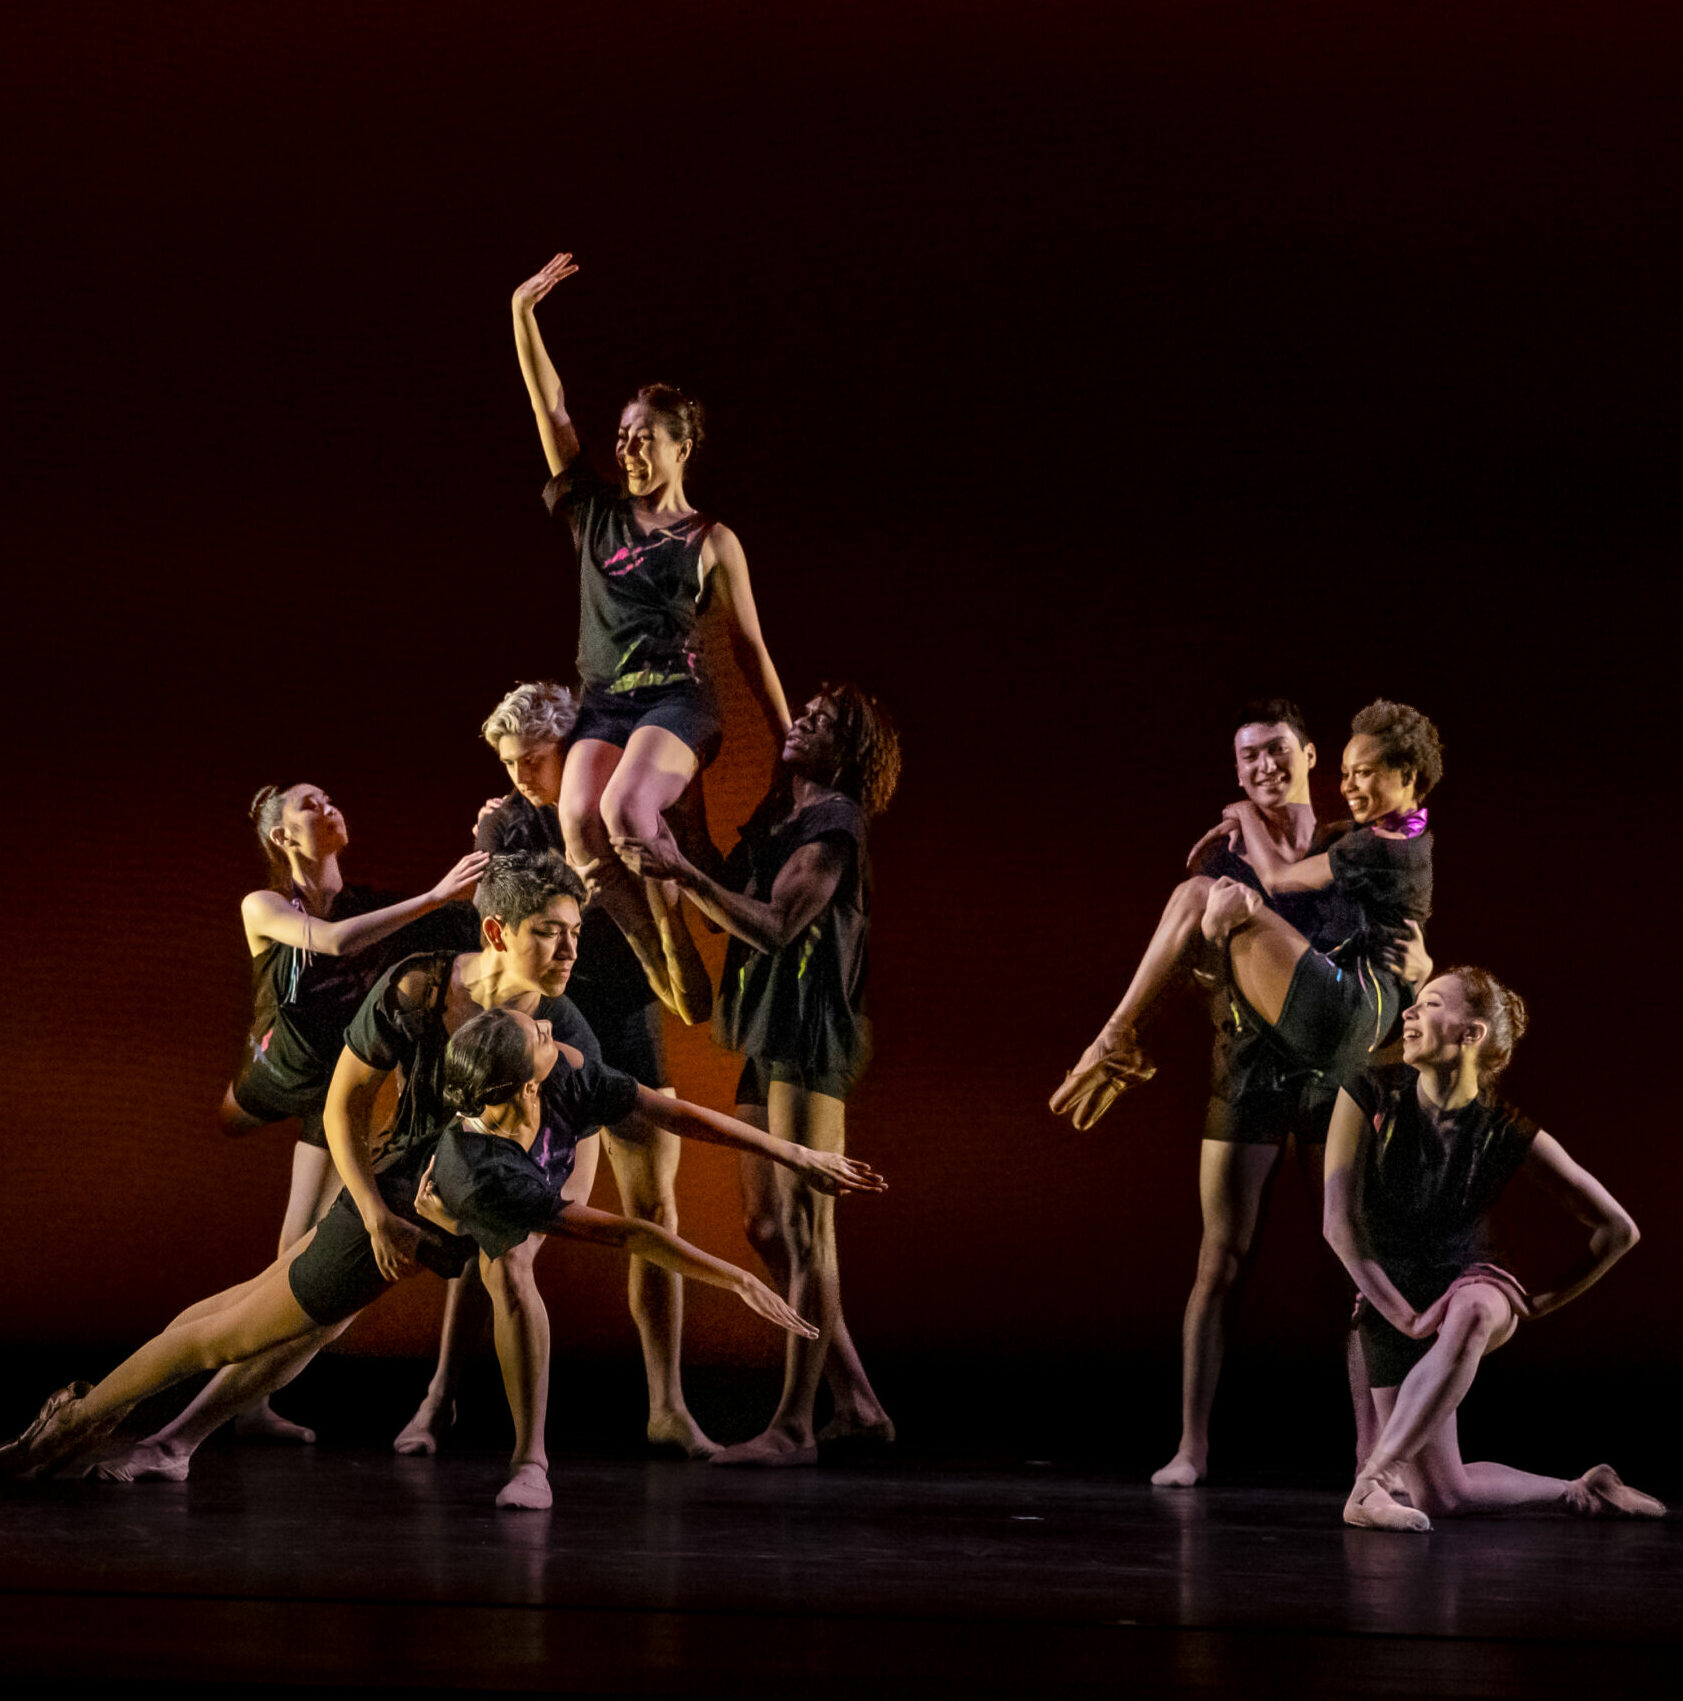 Dancers holding a pose in all different levels.